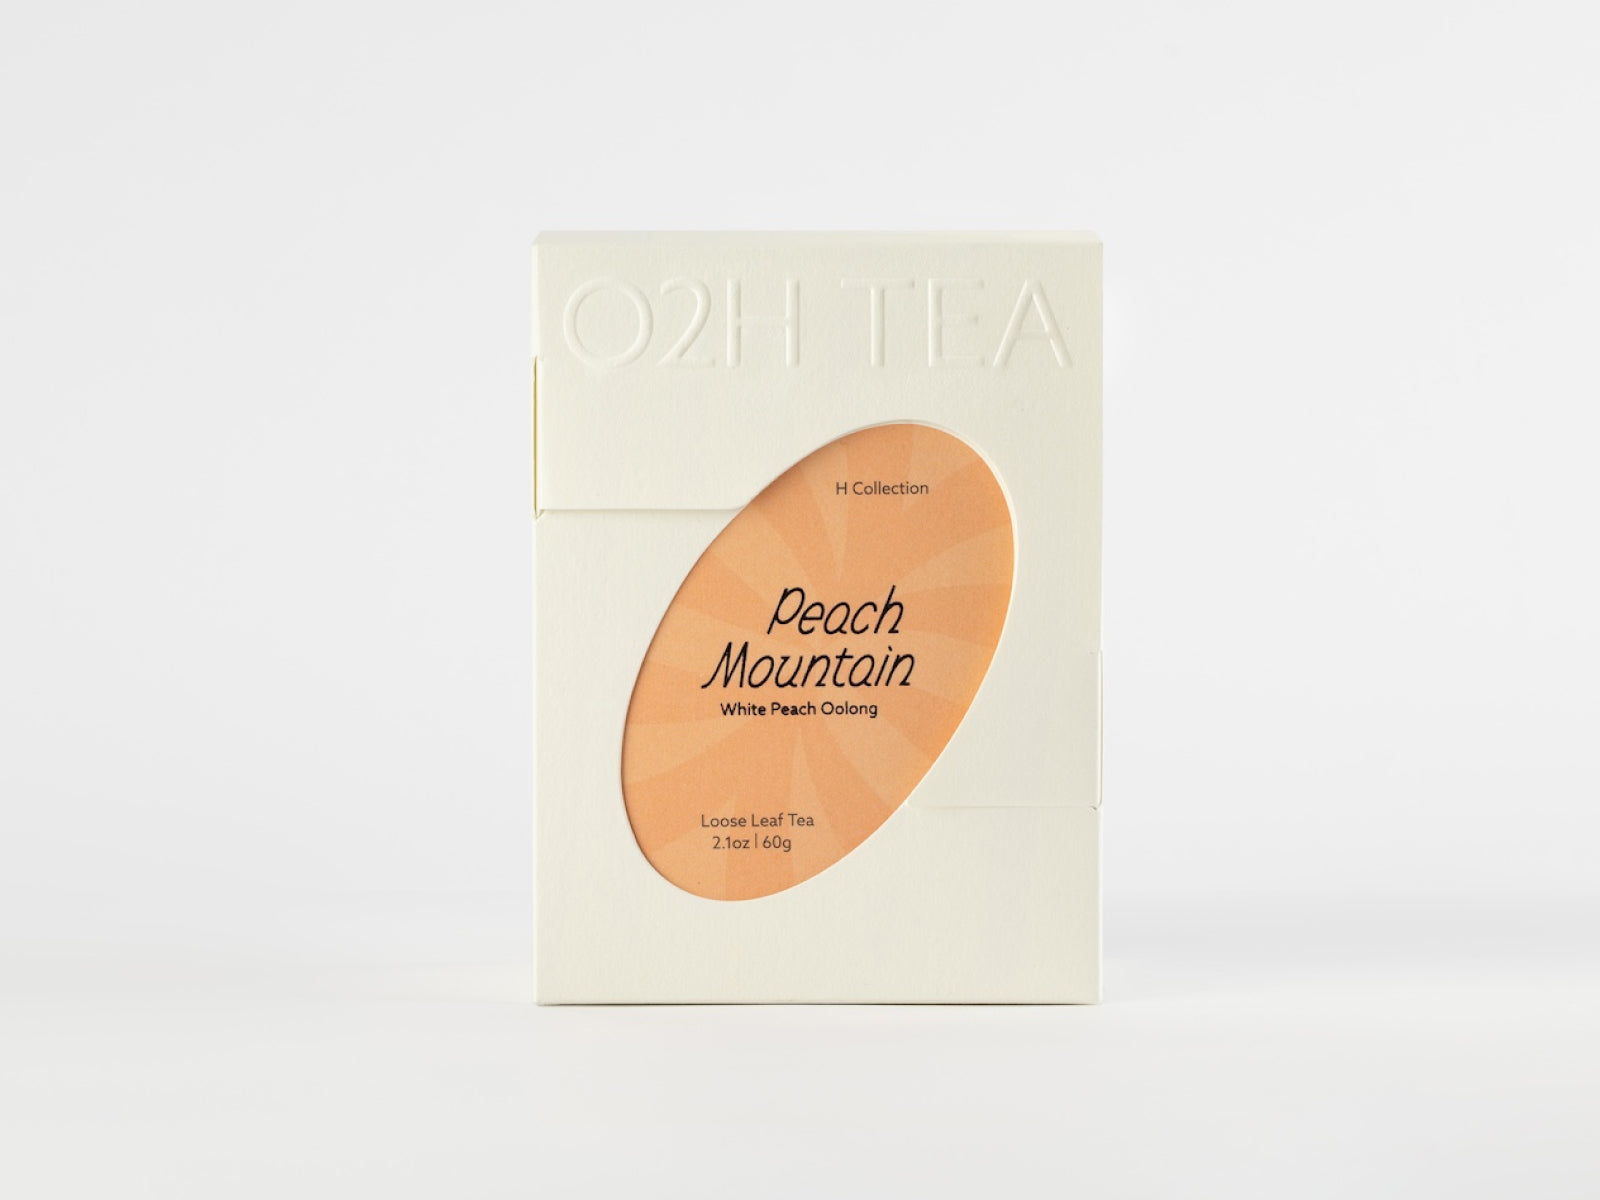 White Peach Oolong Tea in an elegant white package, featuring a transparent window showcasing the product name Peach Mountain